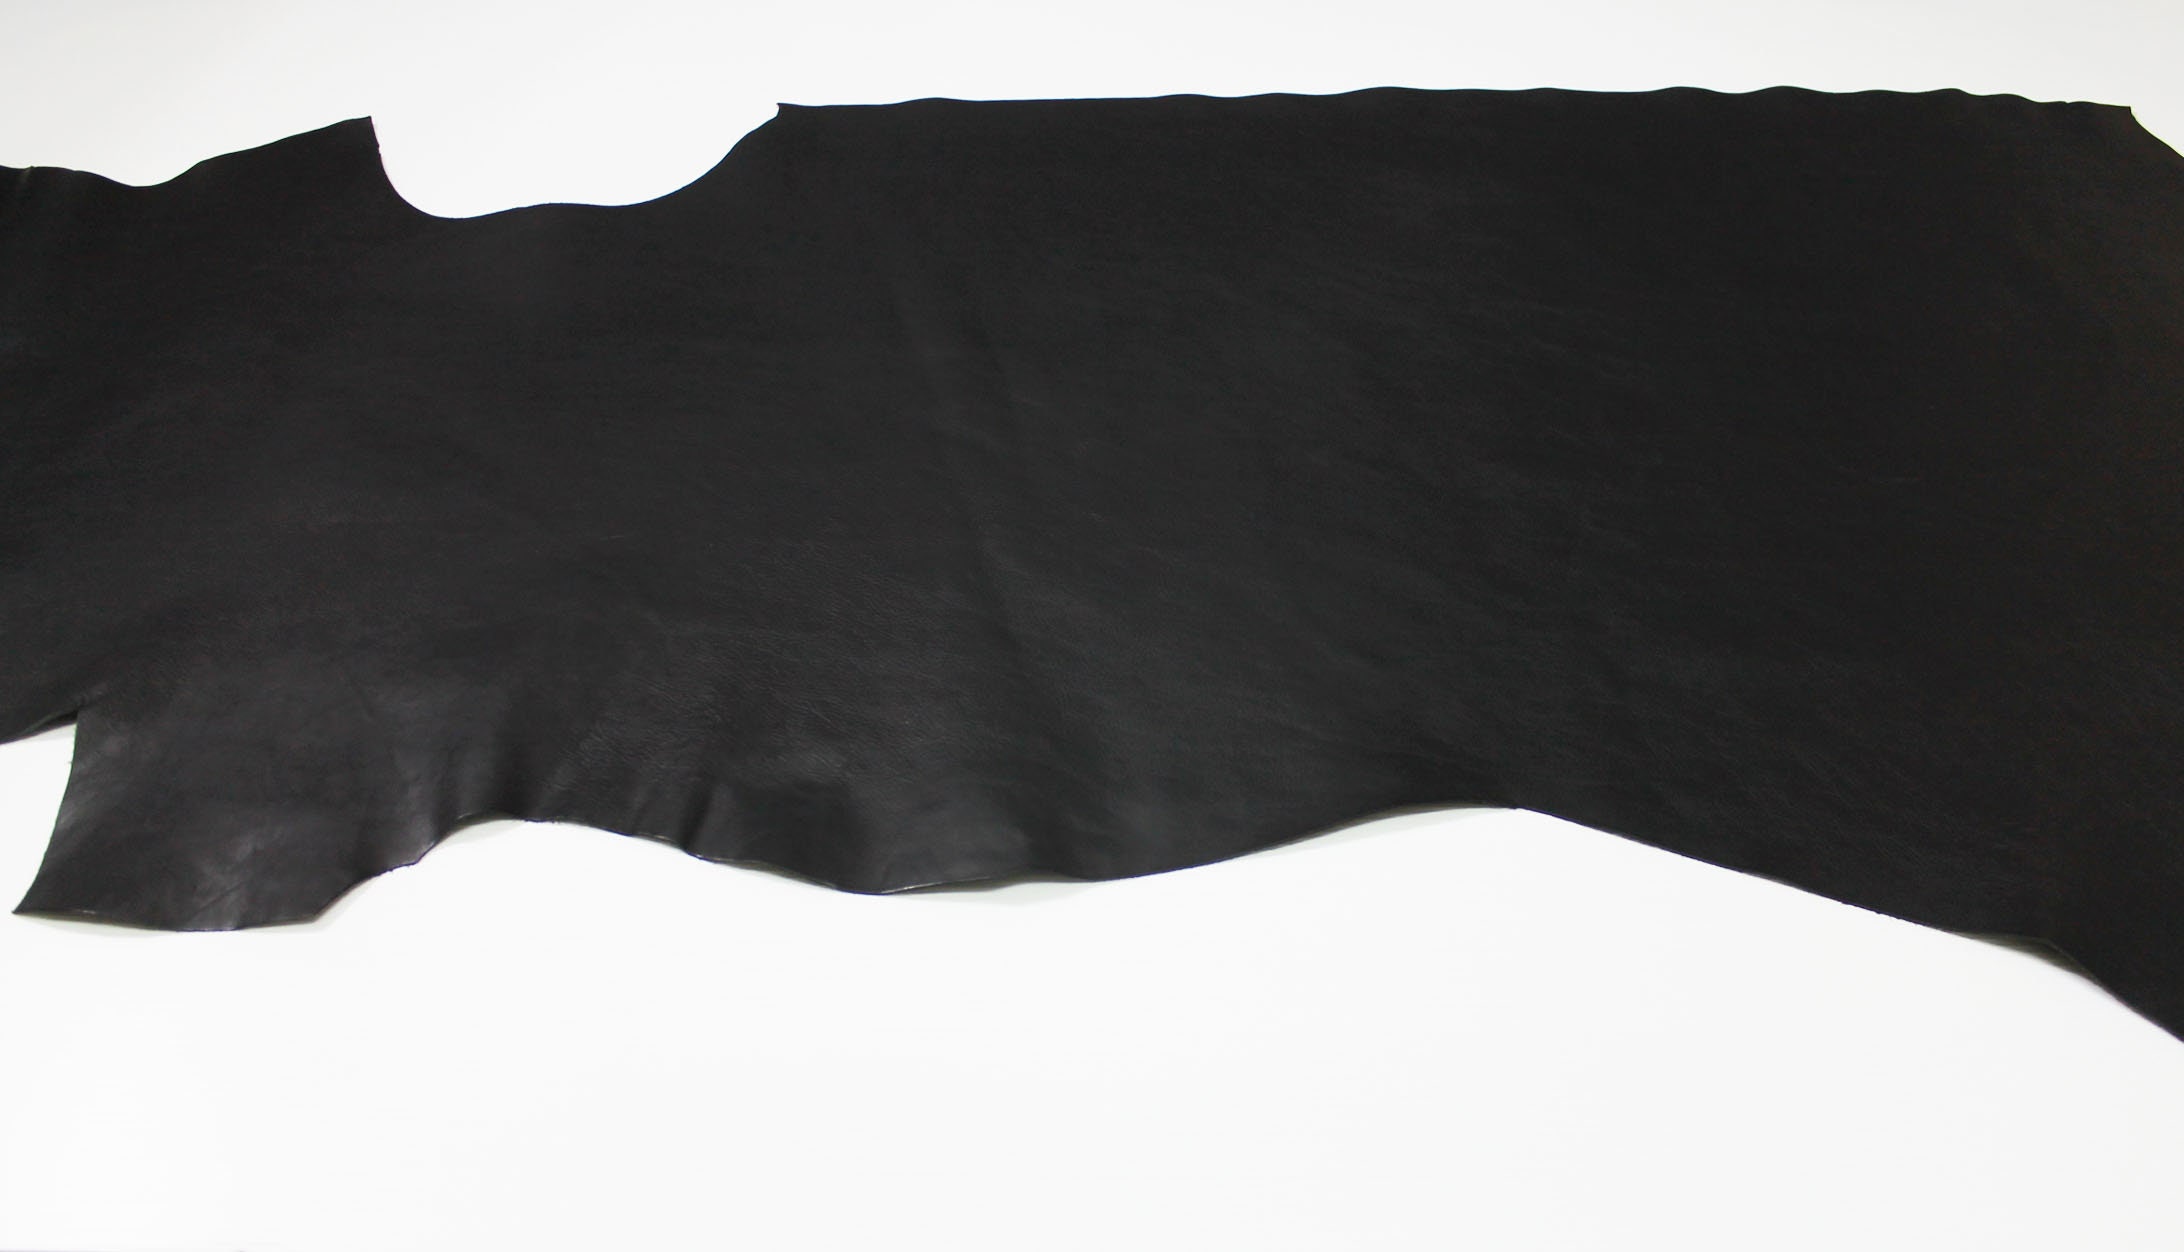 Black Rough Calfskin Calf Cow Cowhide Upholstery Leather Skin Hide